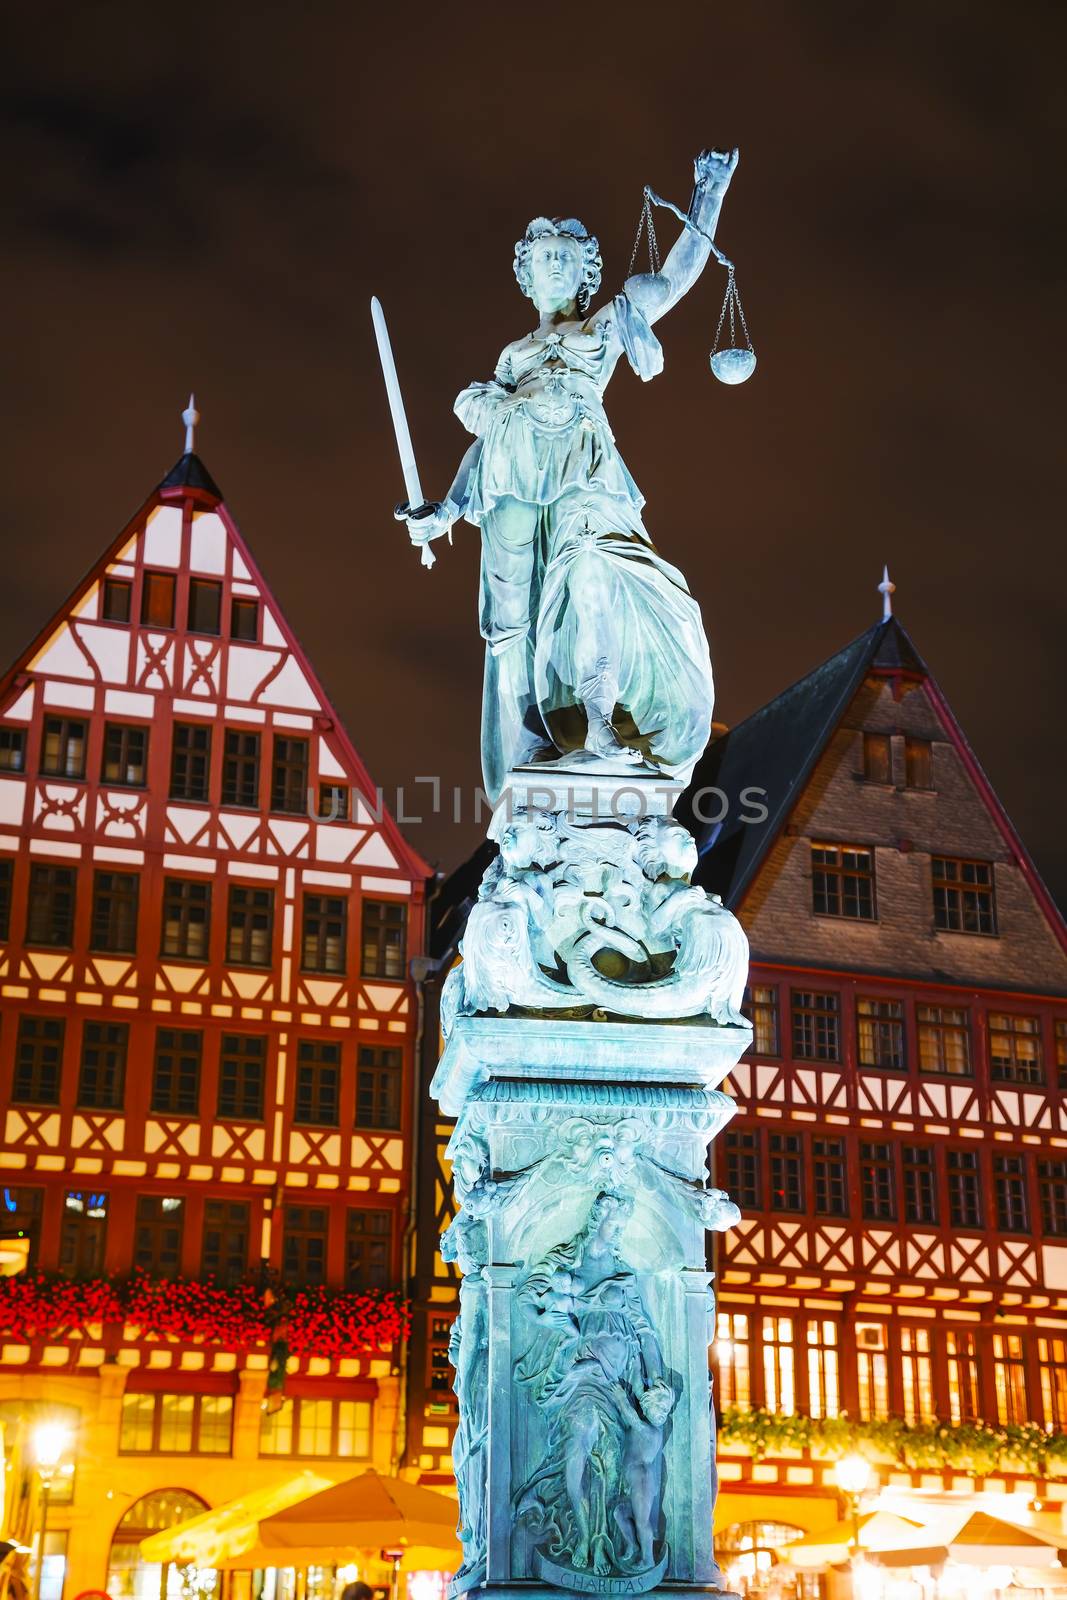 Lady Justice sculpture in Frankfurt, Germany by AndreyKr